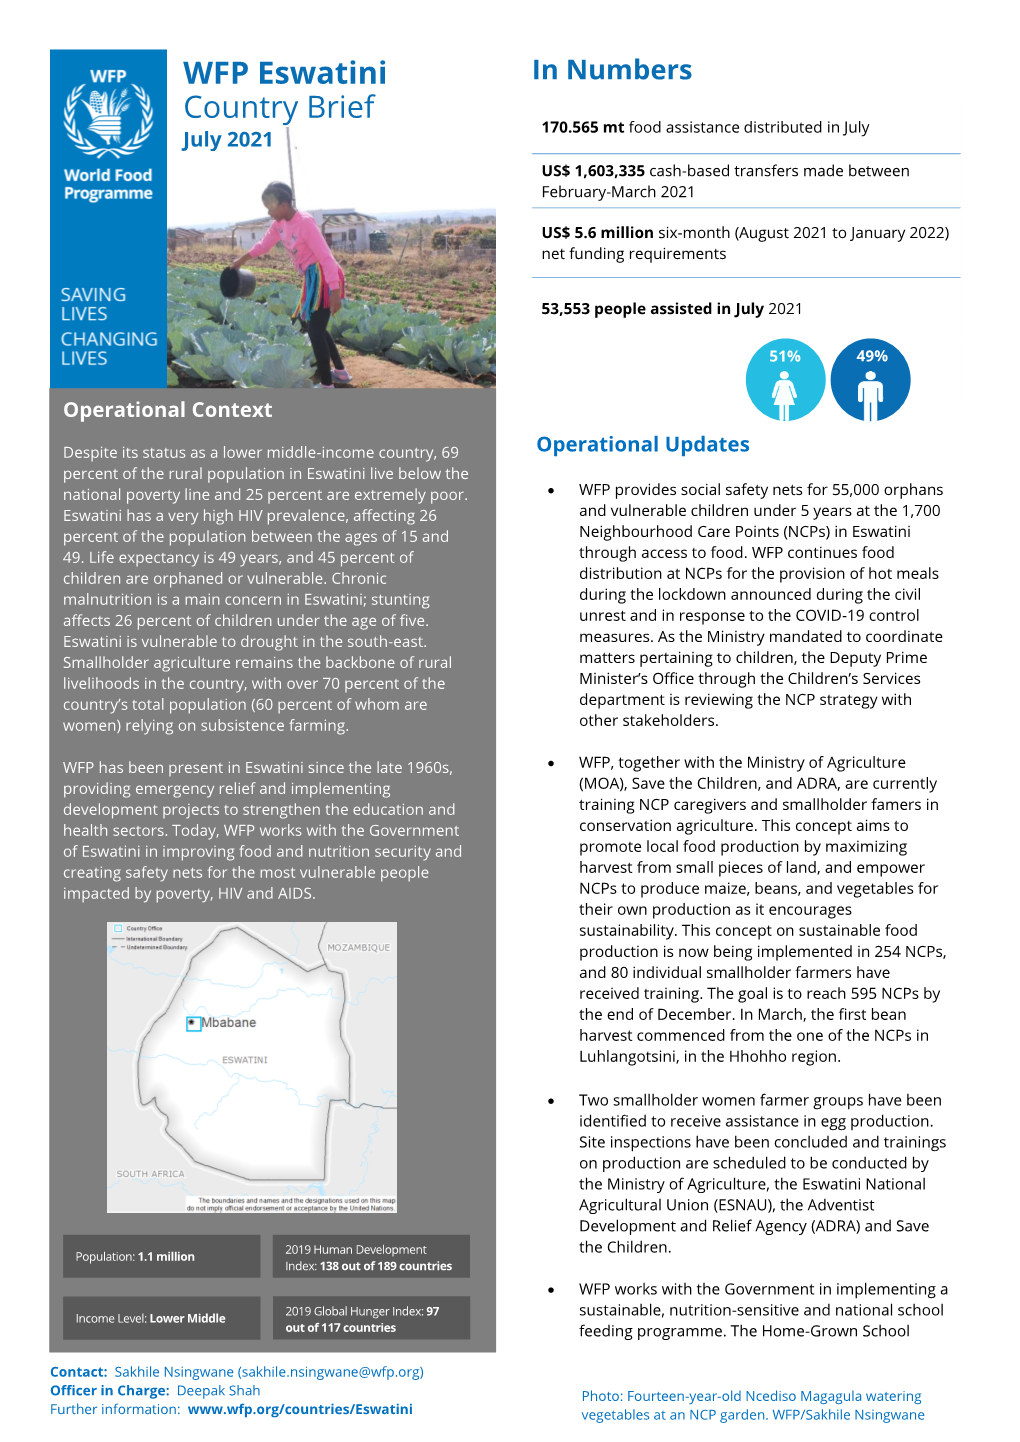 WFP Eswatini Country Brief July 2021